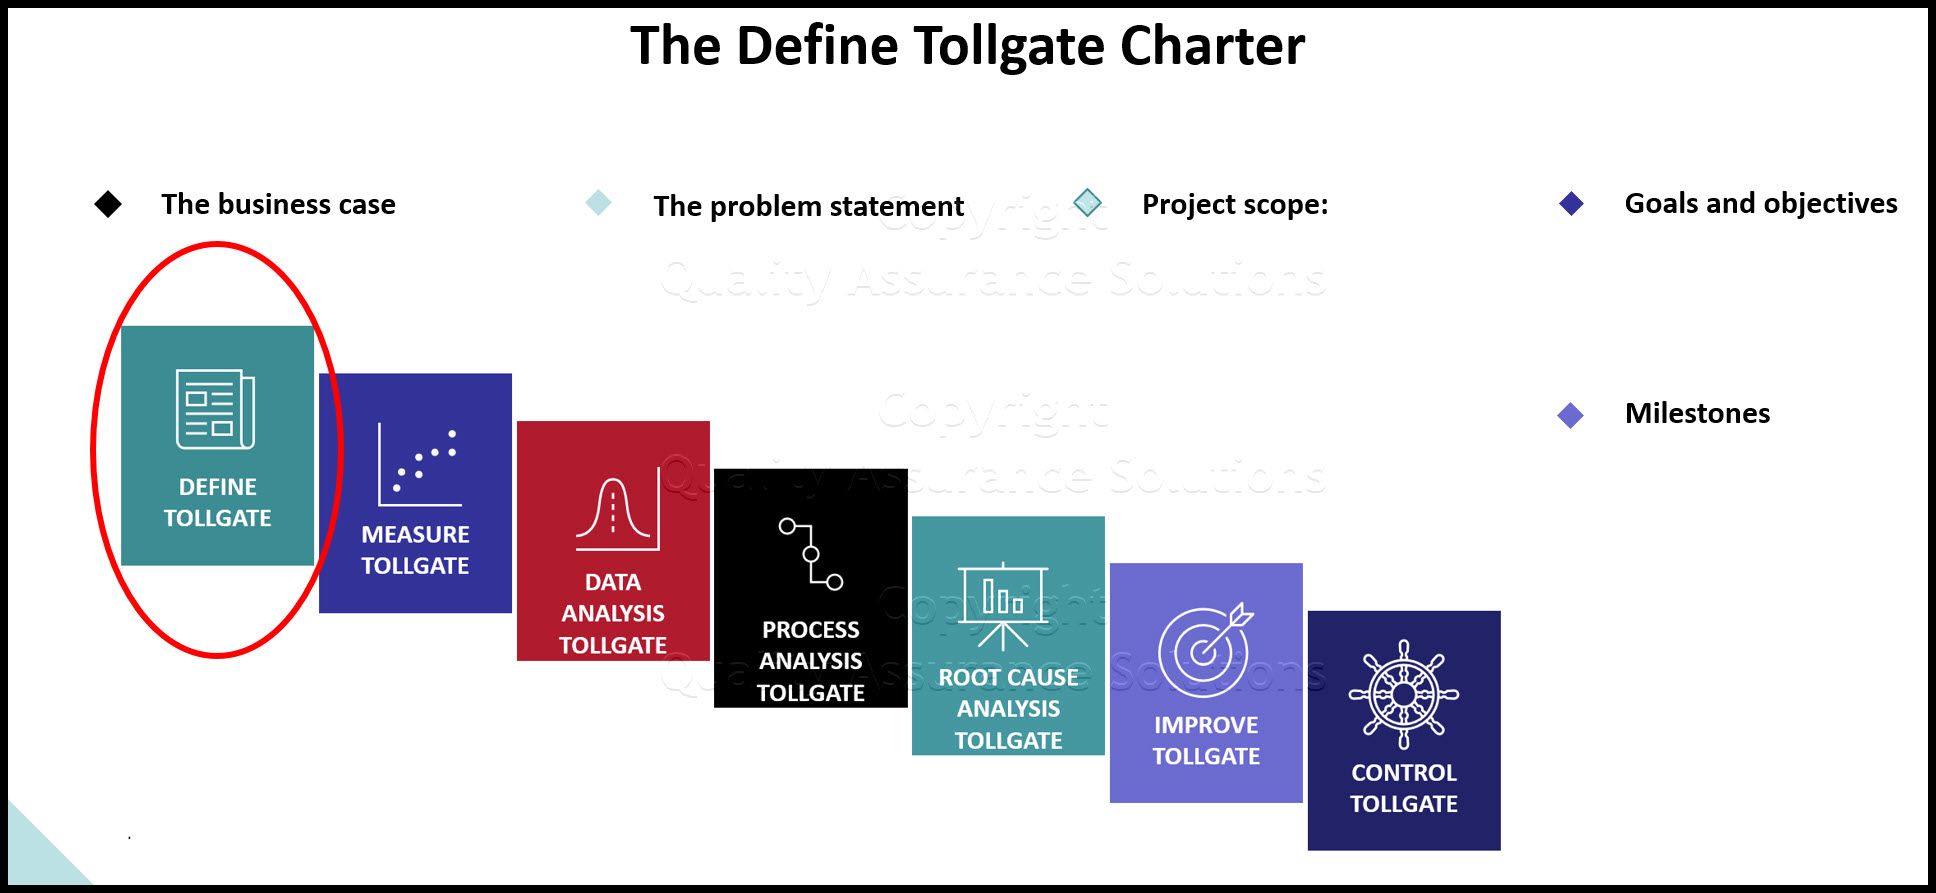 Learn the items to include in the define tollgates stage of the six sigma process. 